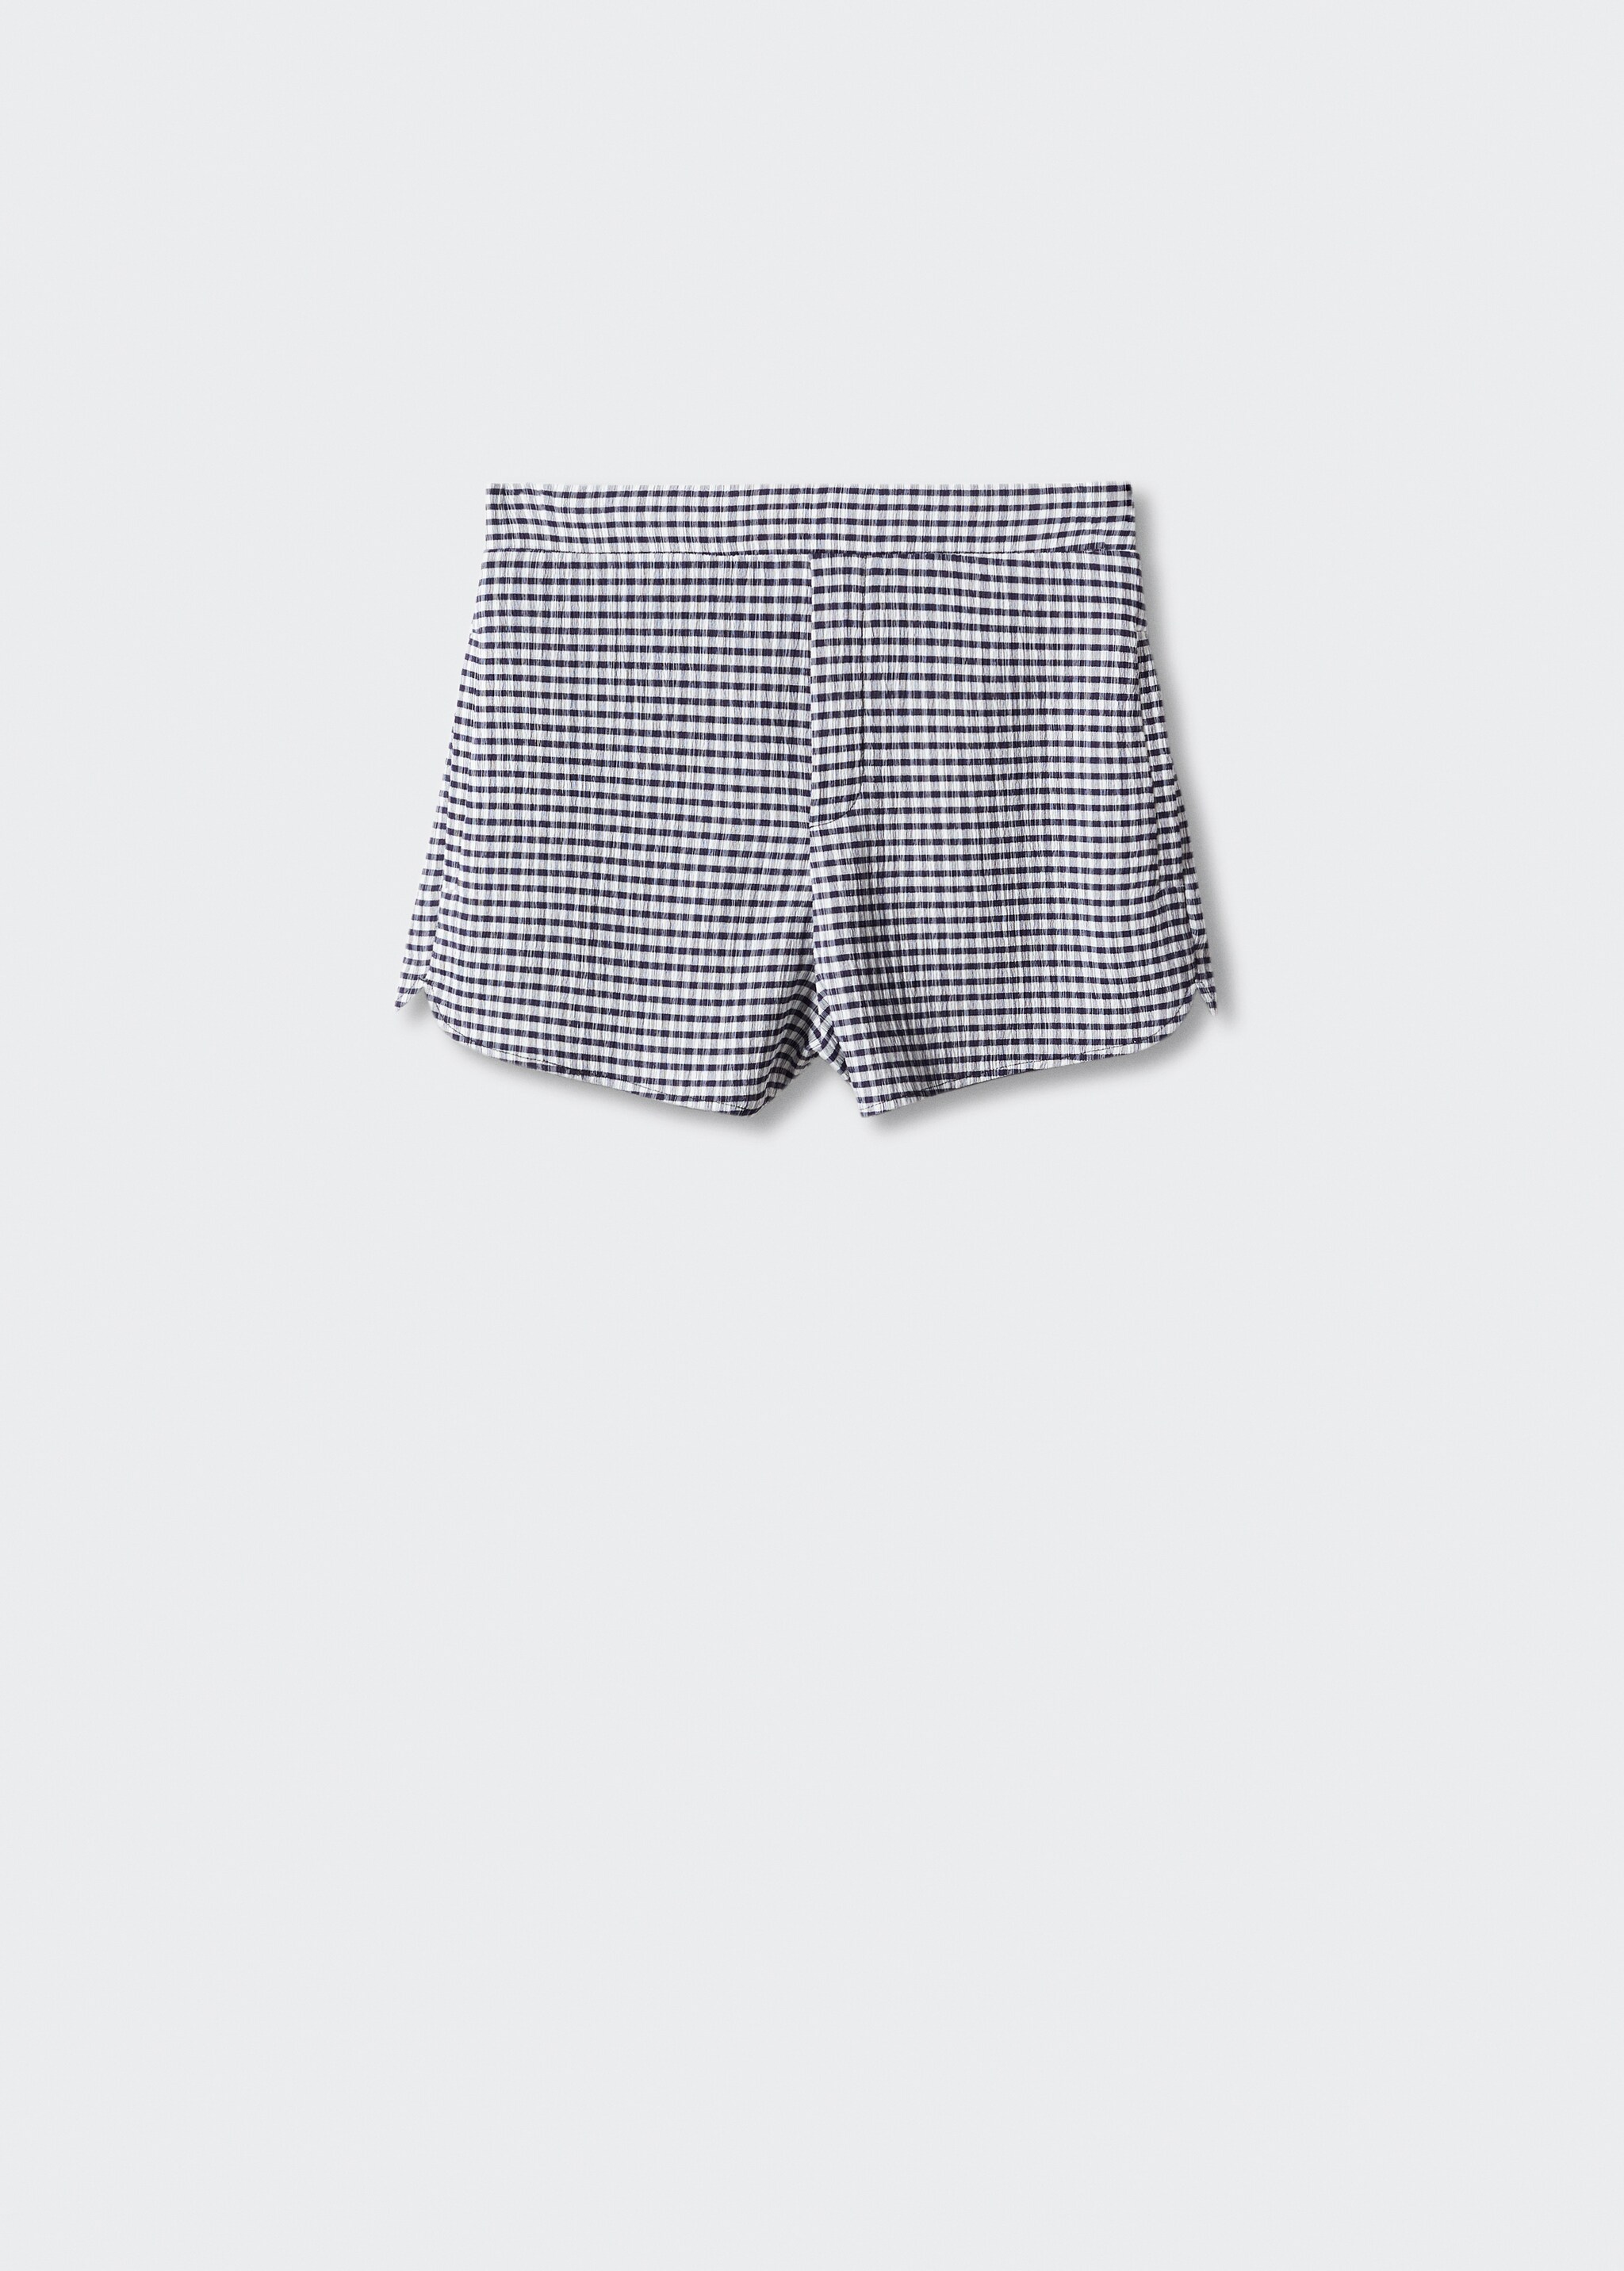 Gingham shorts - Article without model